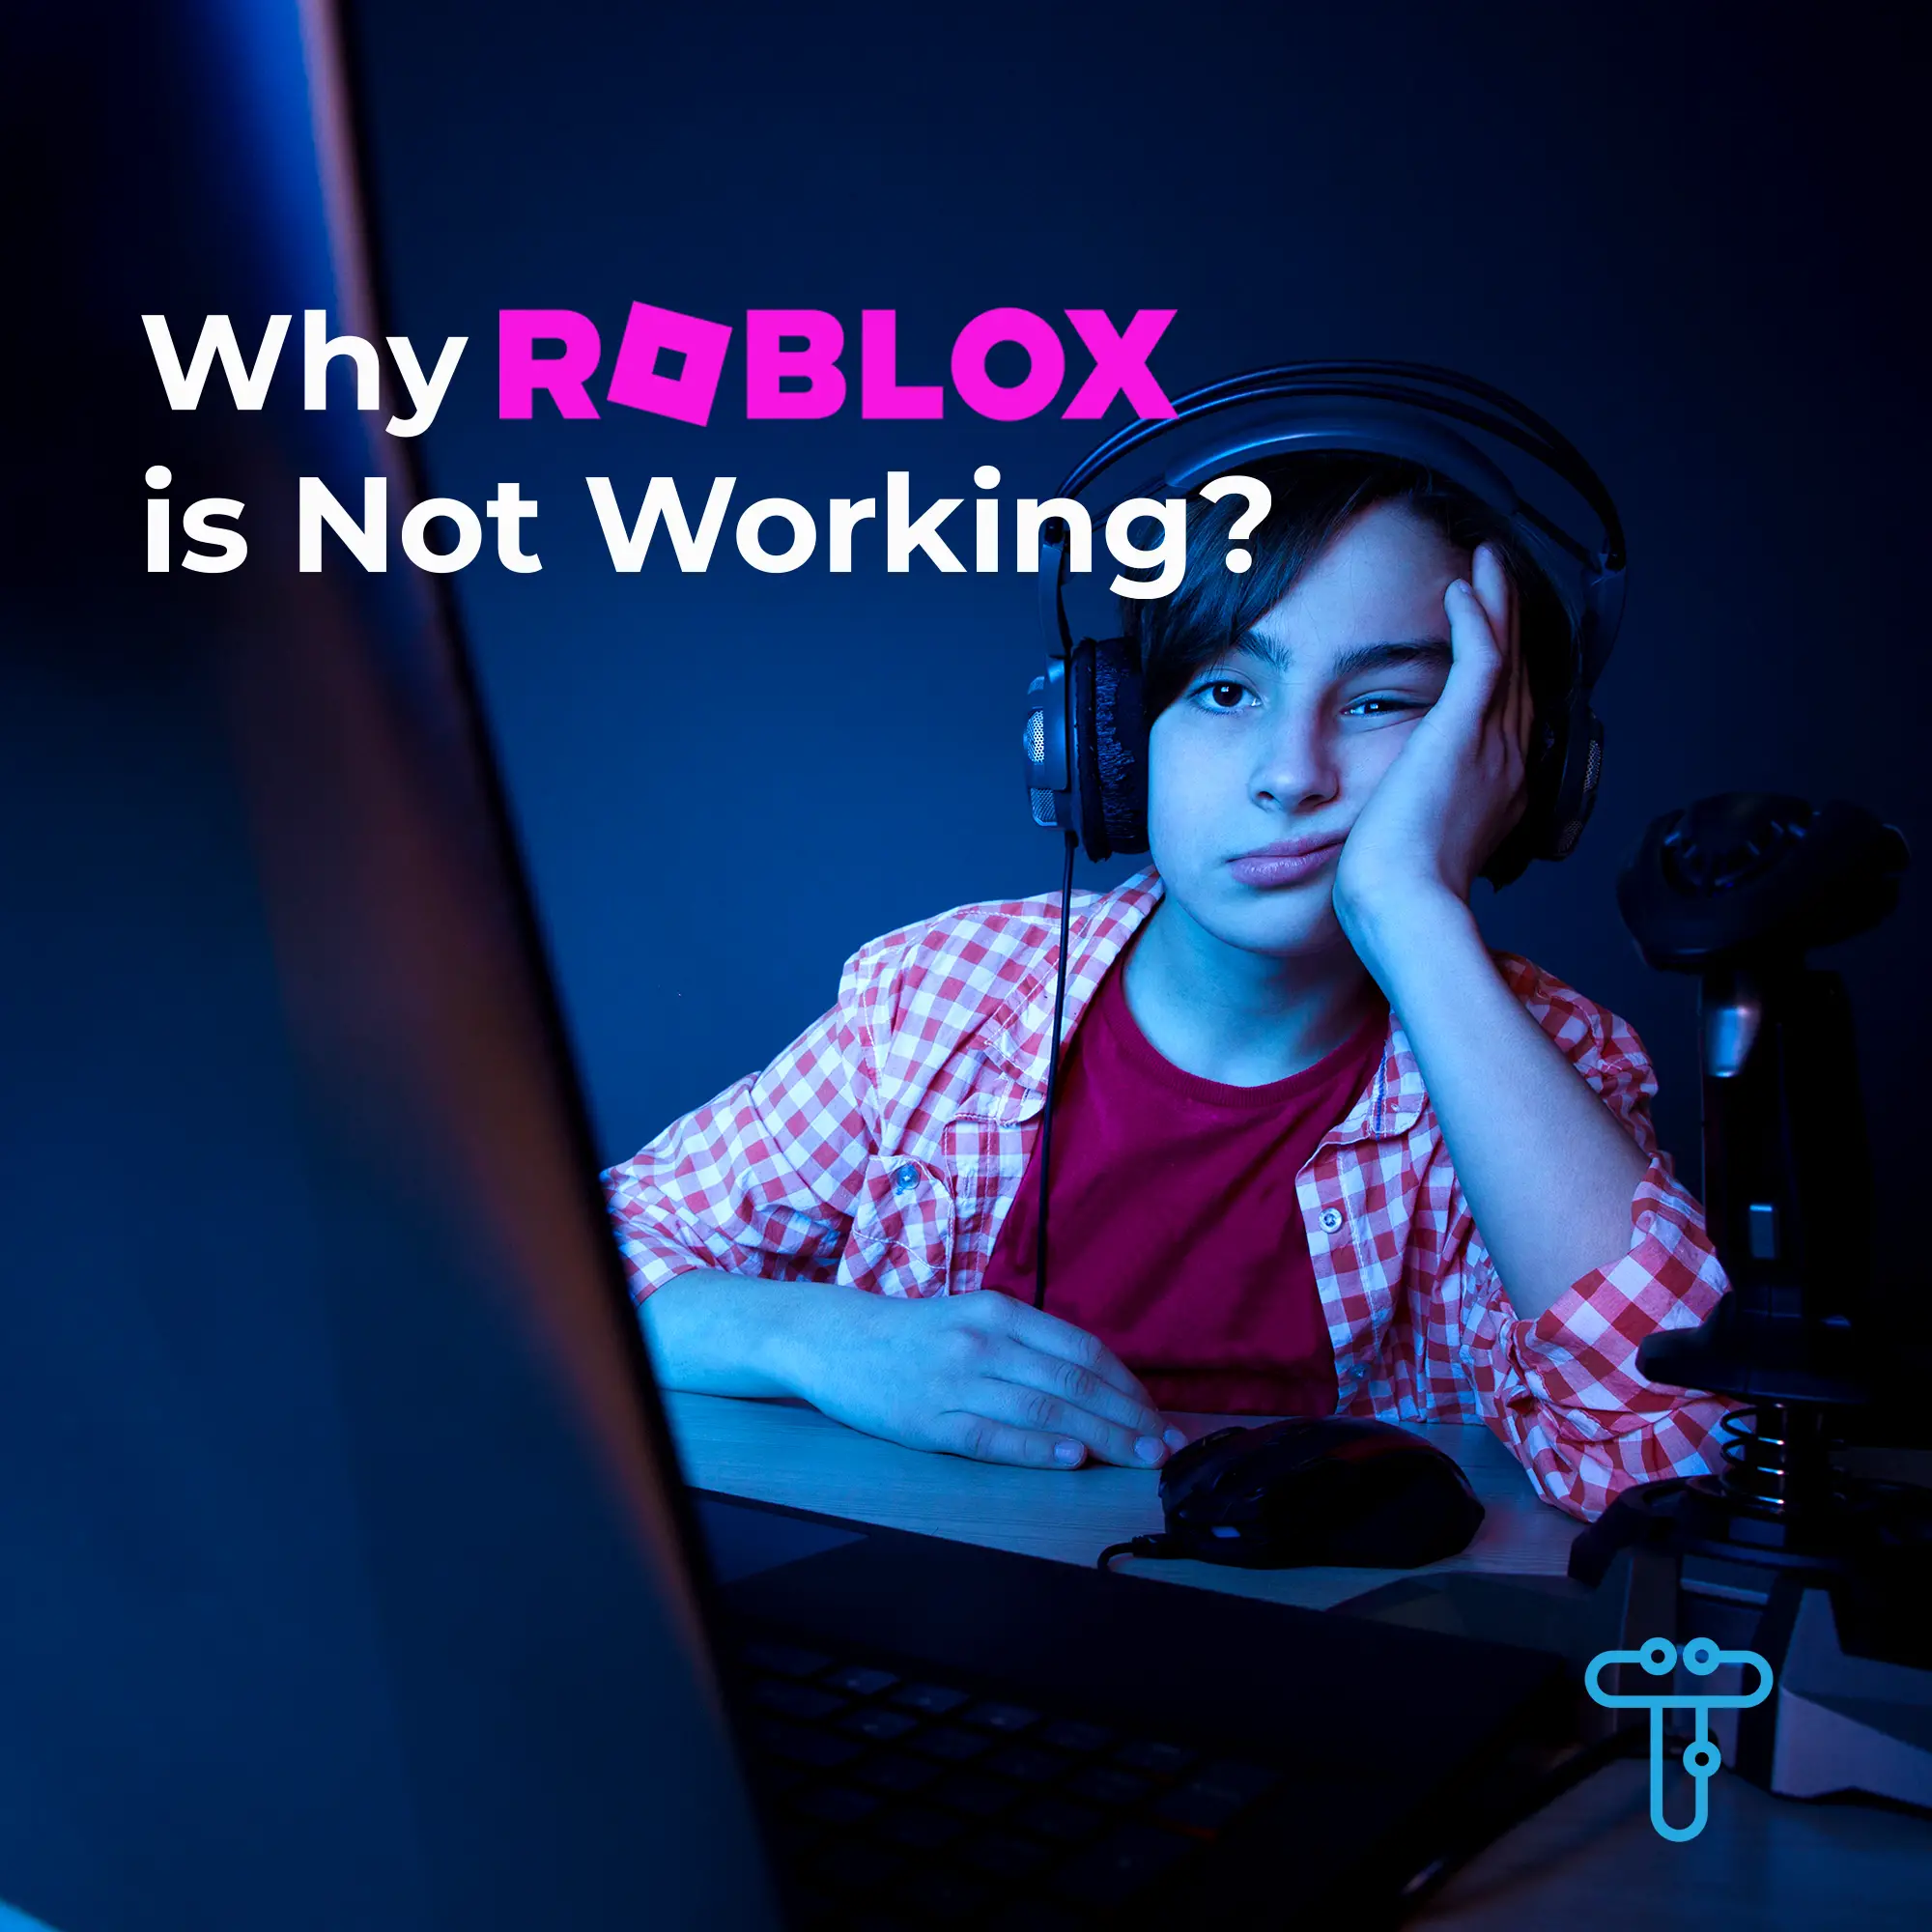 why Roblox is not working image